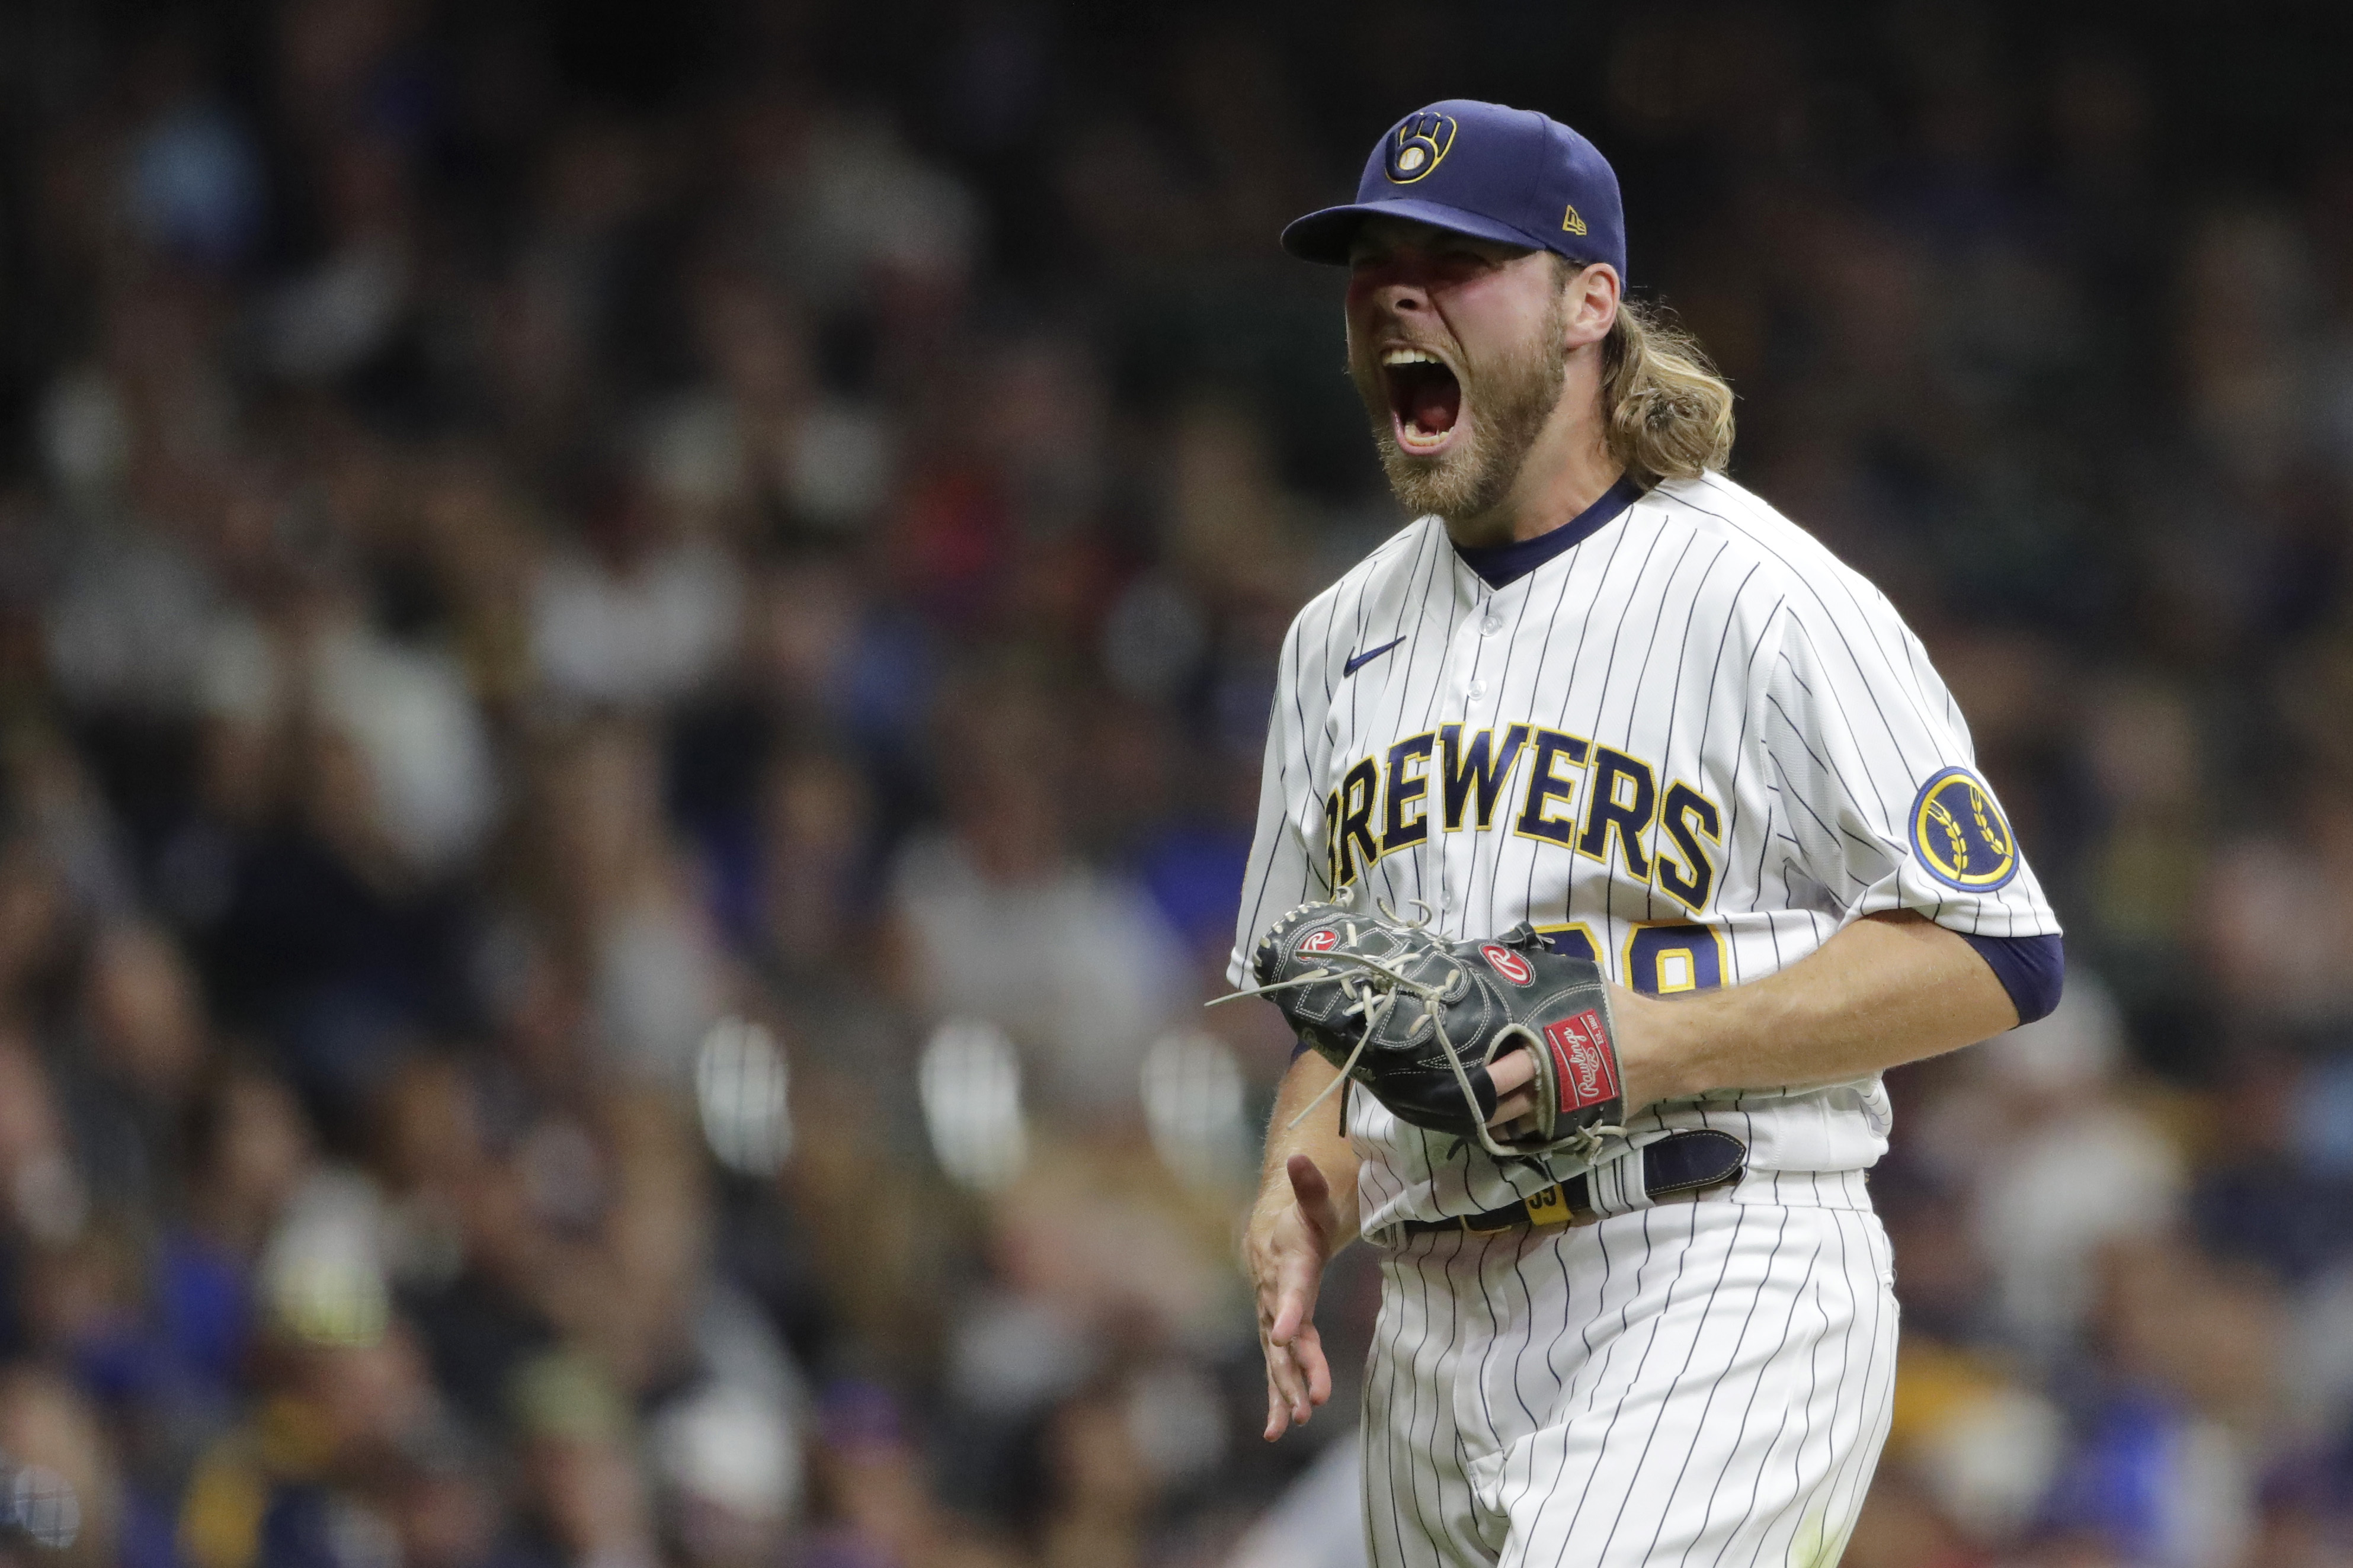 Milwaukee Brewers clinch division title in final home game